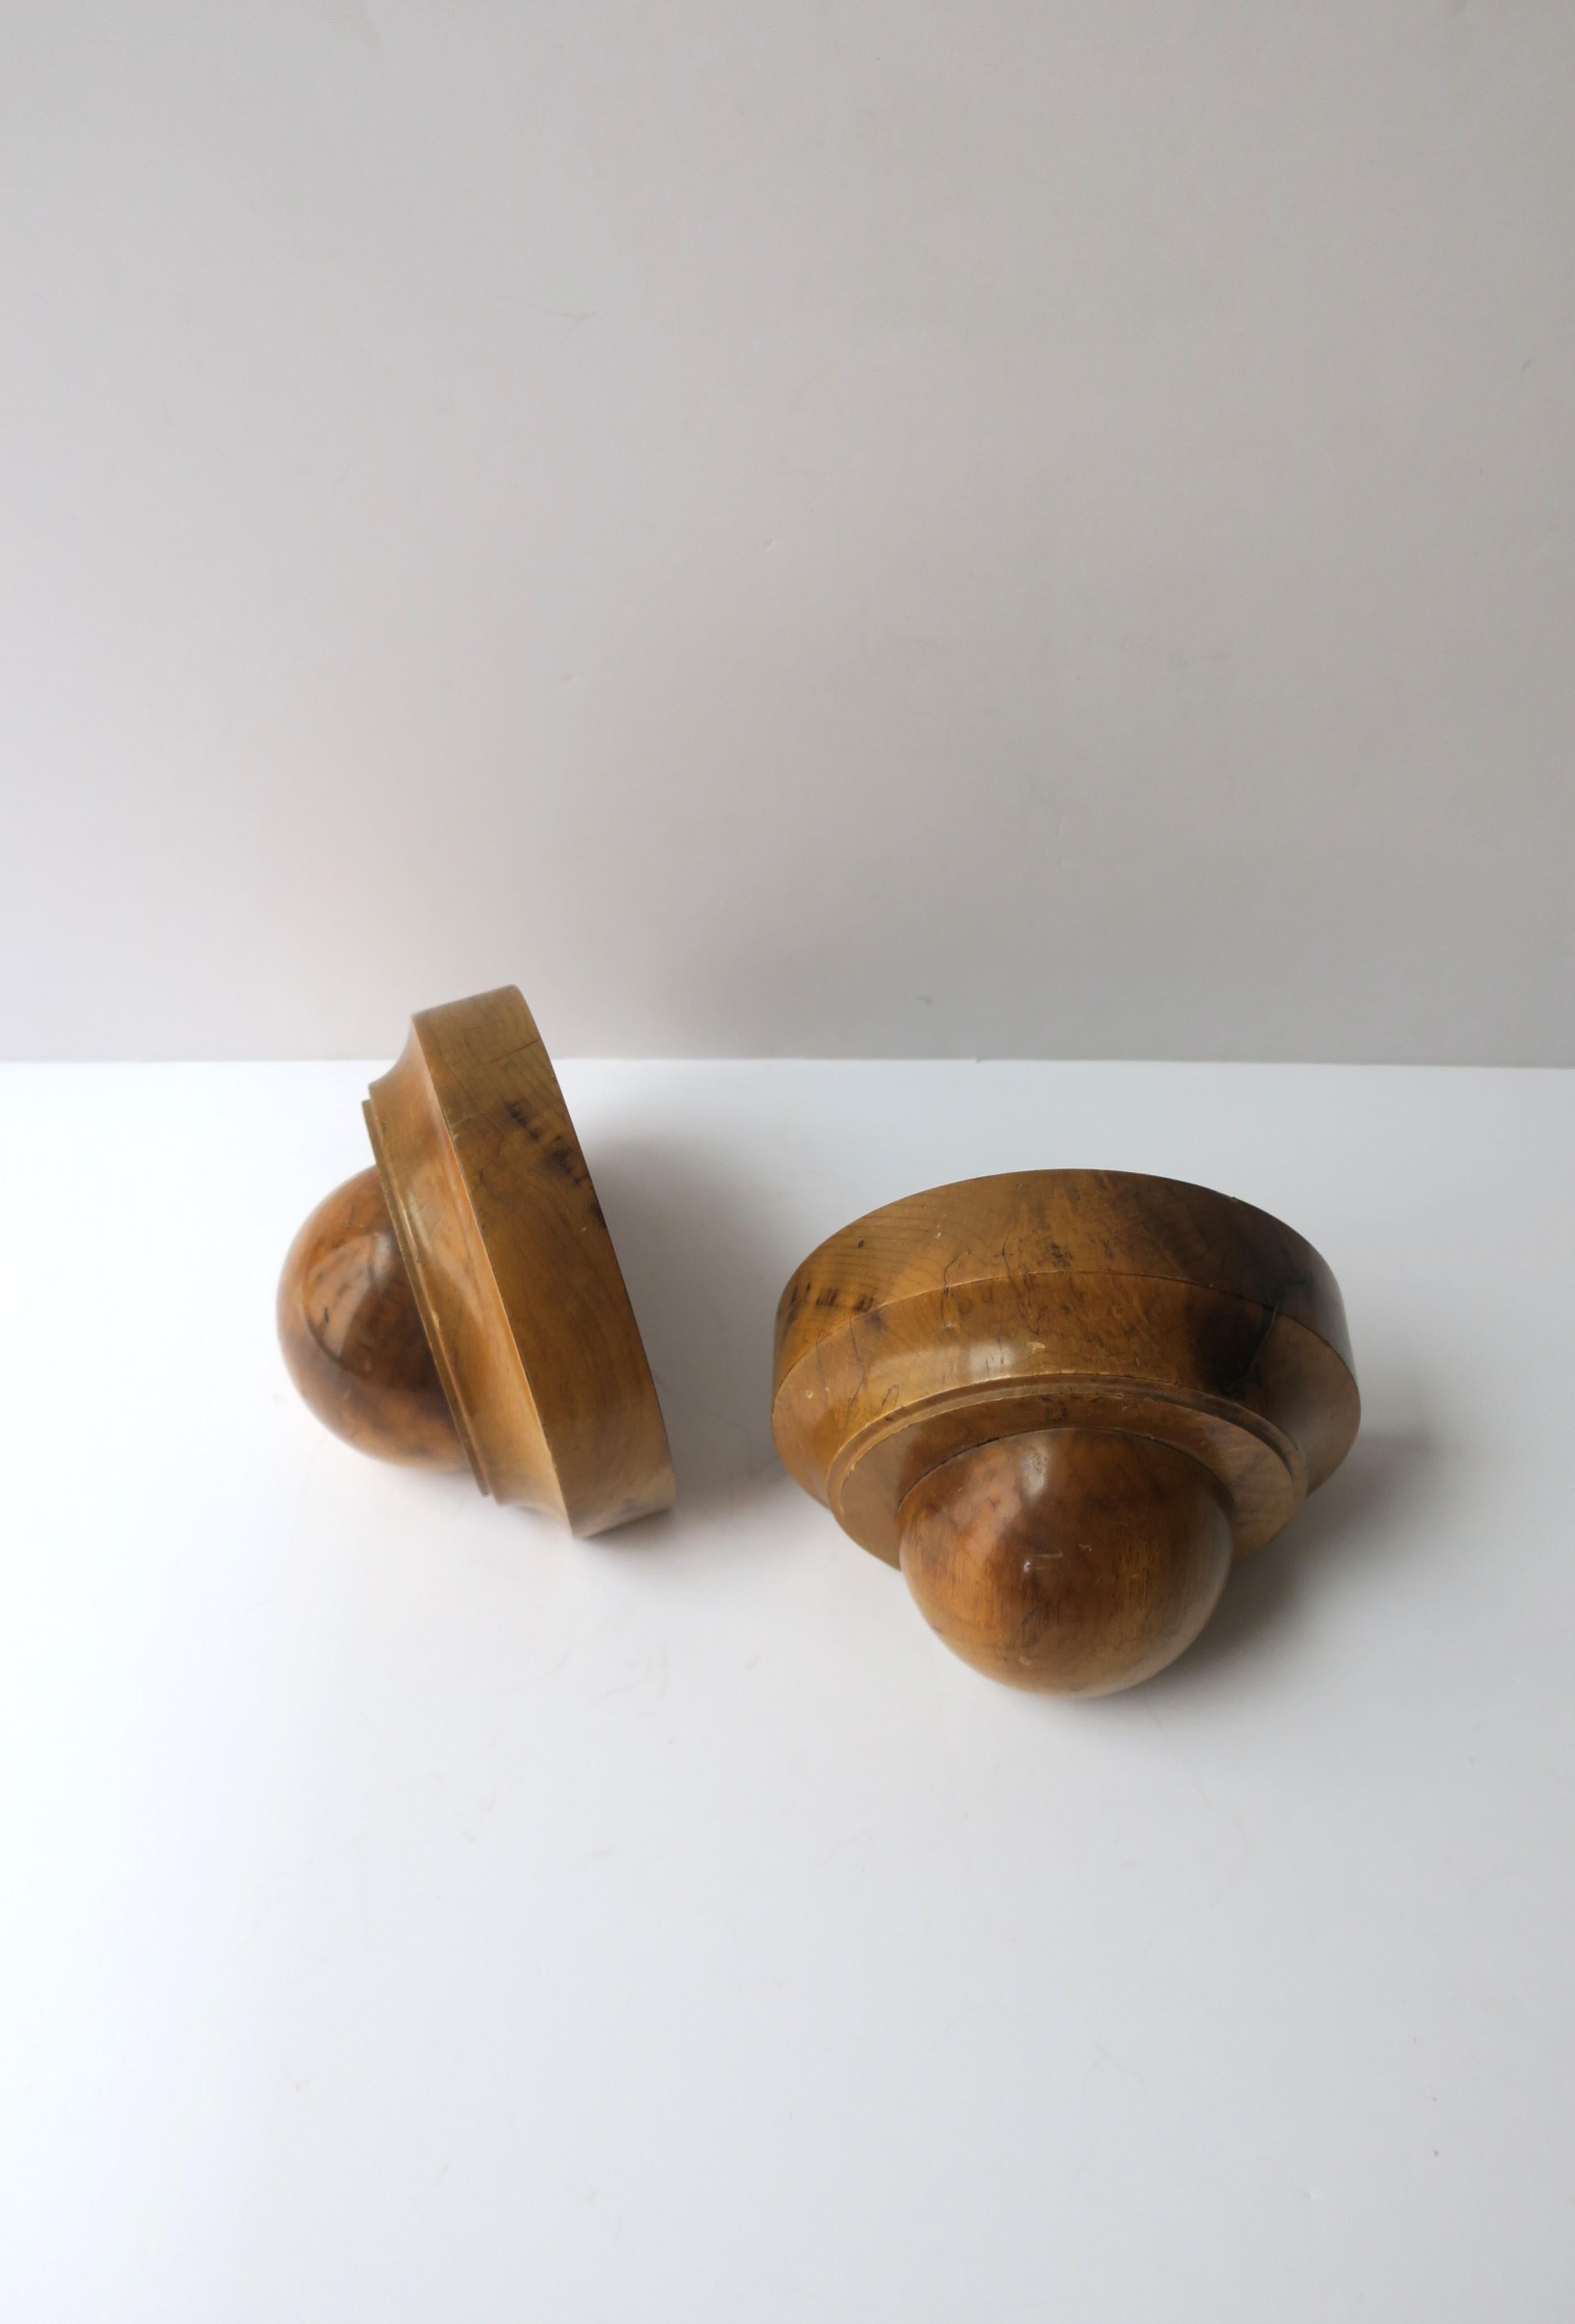 20th Century Art Deco Birdseye Maple Wood Bookends, Pair For Sale